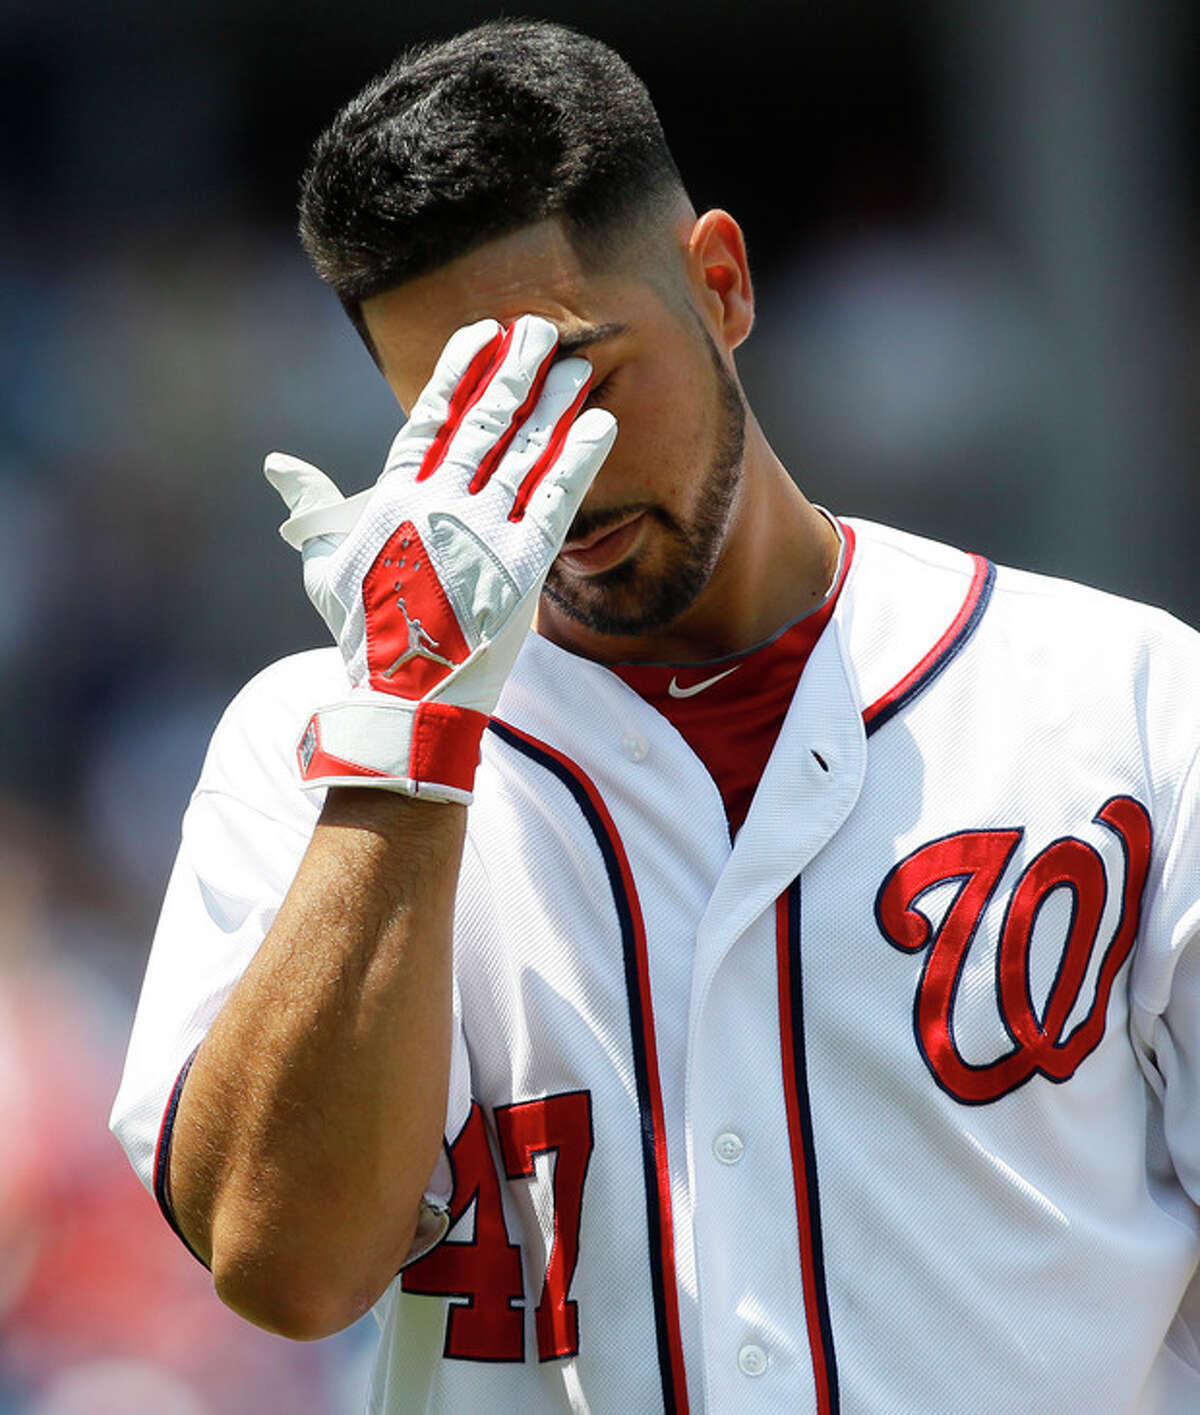 Washington Nationals starting pitcher Gio Gonzalez wipes his brow as he walks back to the dugout after grounding out in the third inning of a baseball game against the New York Mets on Thursday, July 19, 2012, in Washington. (AP Photo/Carolyn Kaster)